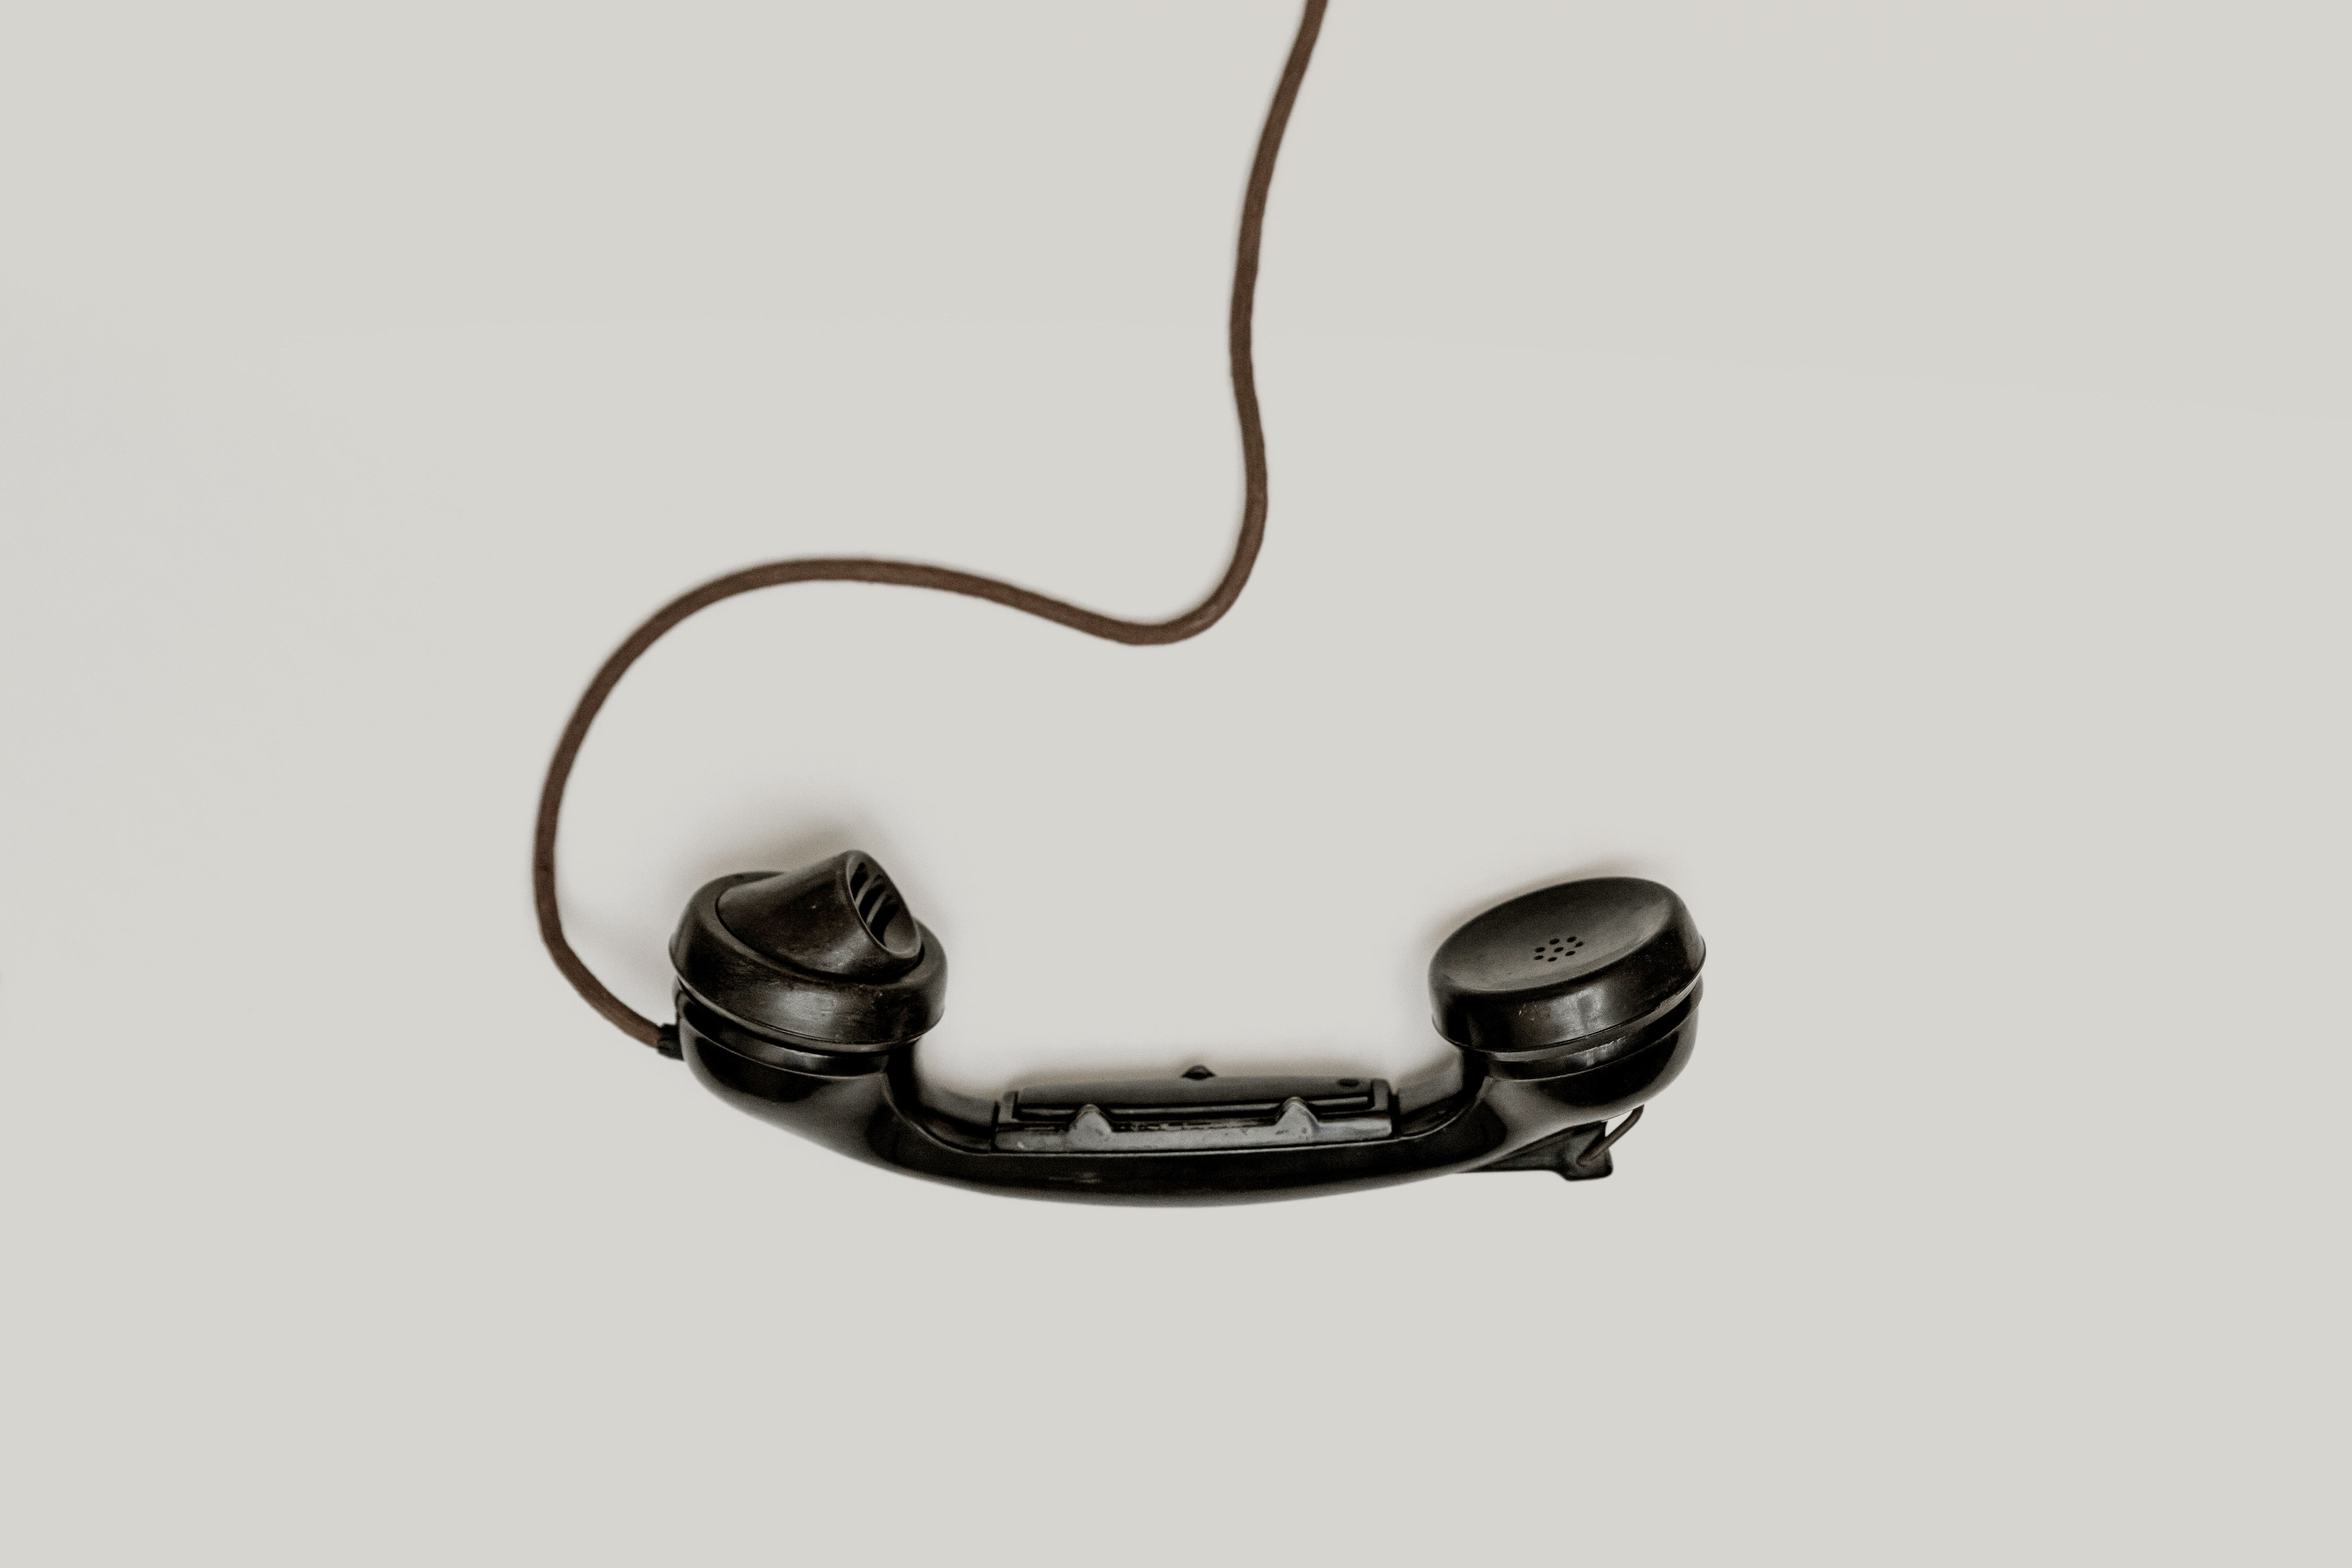 Phone on a cord